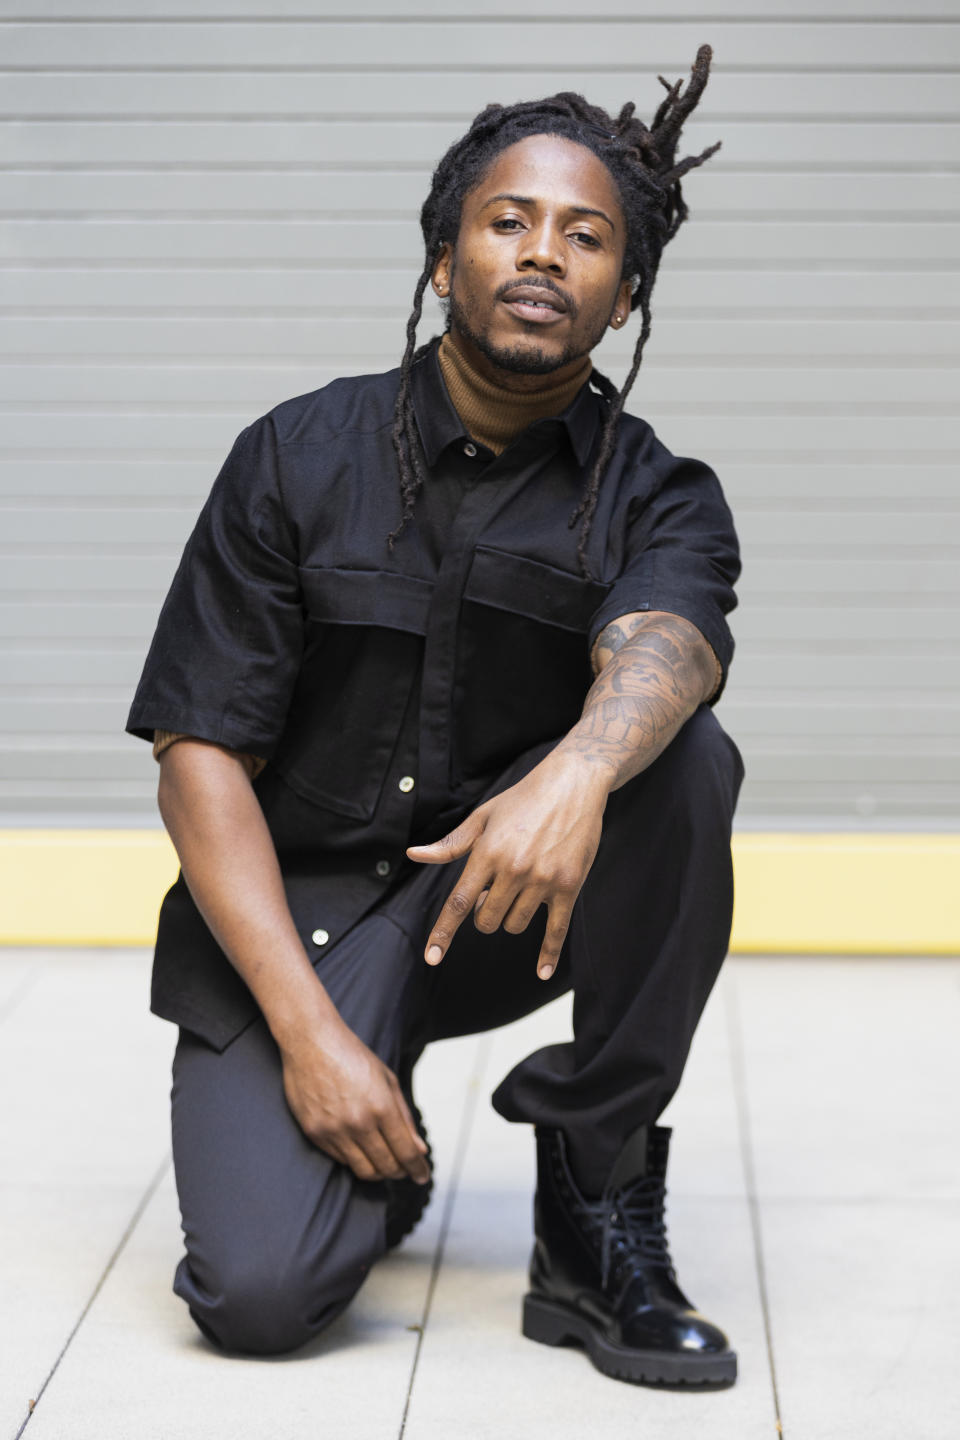 Rapper D Smoke poses for a portrait in Los Angeles on Saturday, Dec. 26, 2020. The rapper and school teacher is nominated for two Grammy Awards, one for best rap album for "Black Habits," and one for best new artist. The 63rd Annual Grammy Awards will be held on Sunday, March 14. (Willy Sanjuan/Invision/AP)